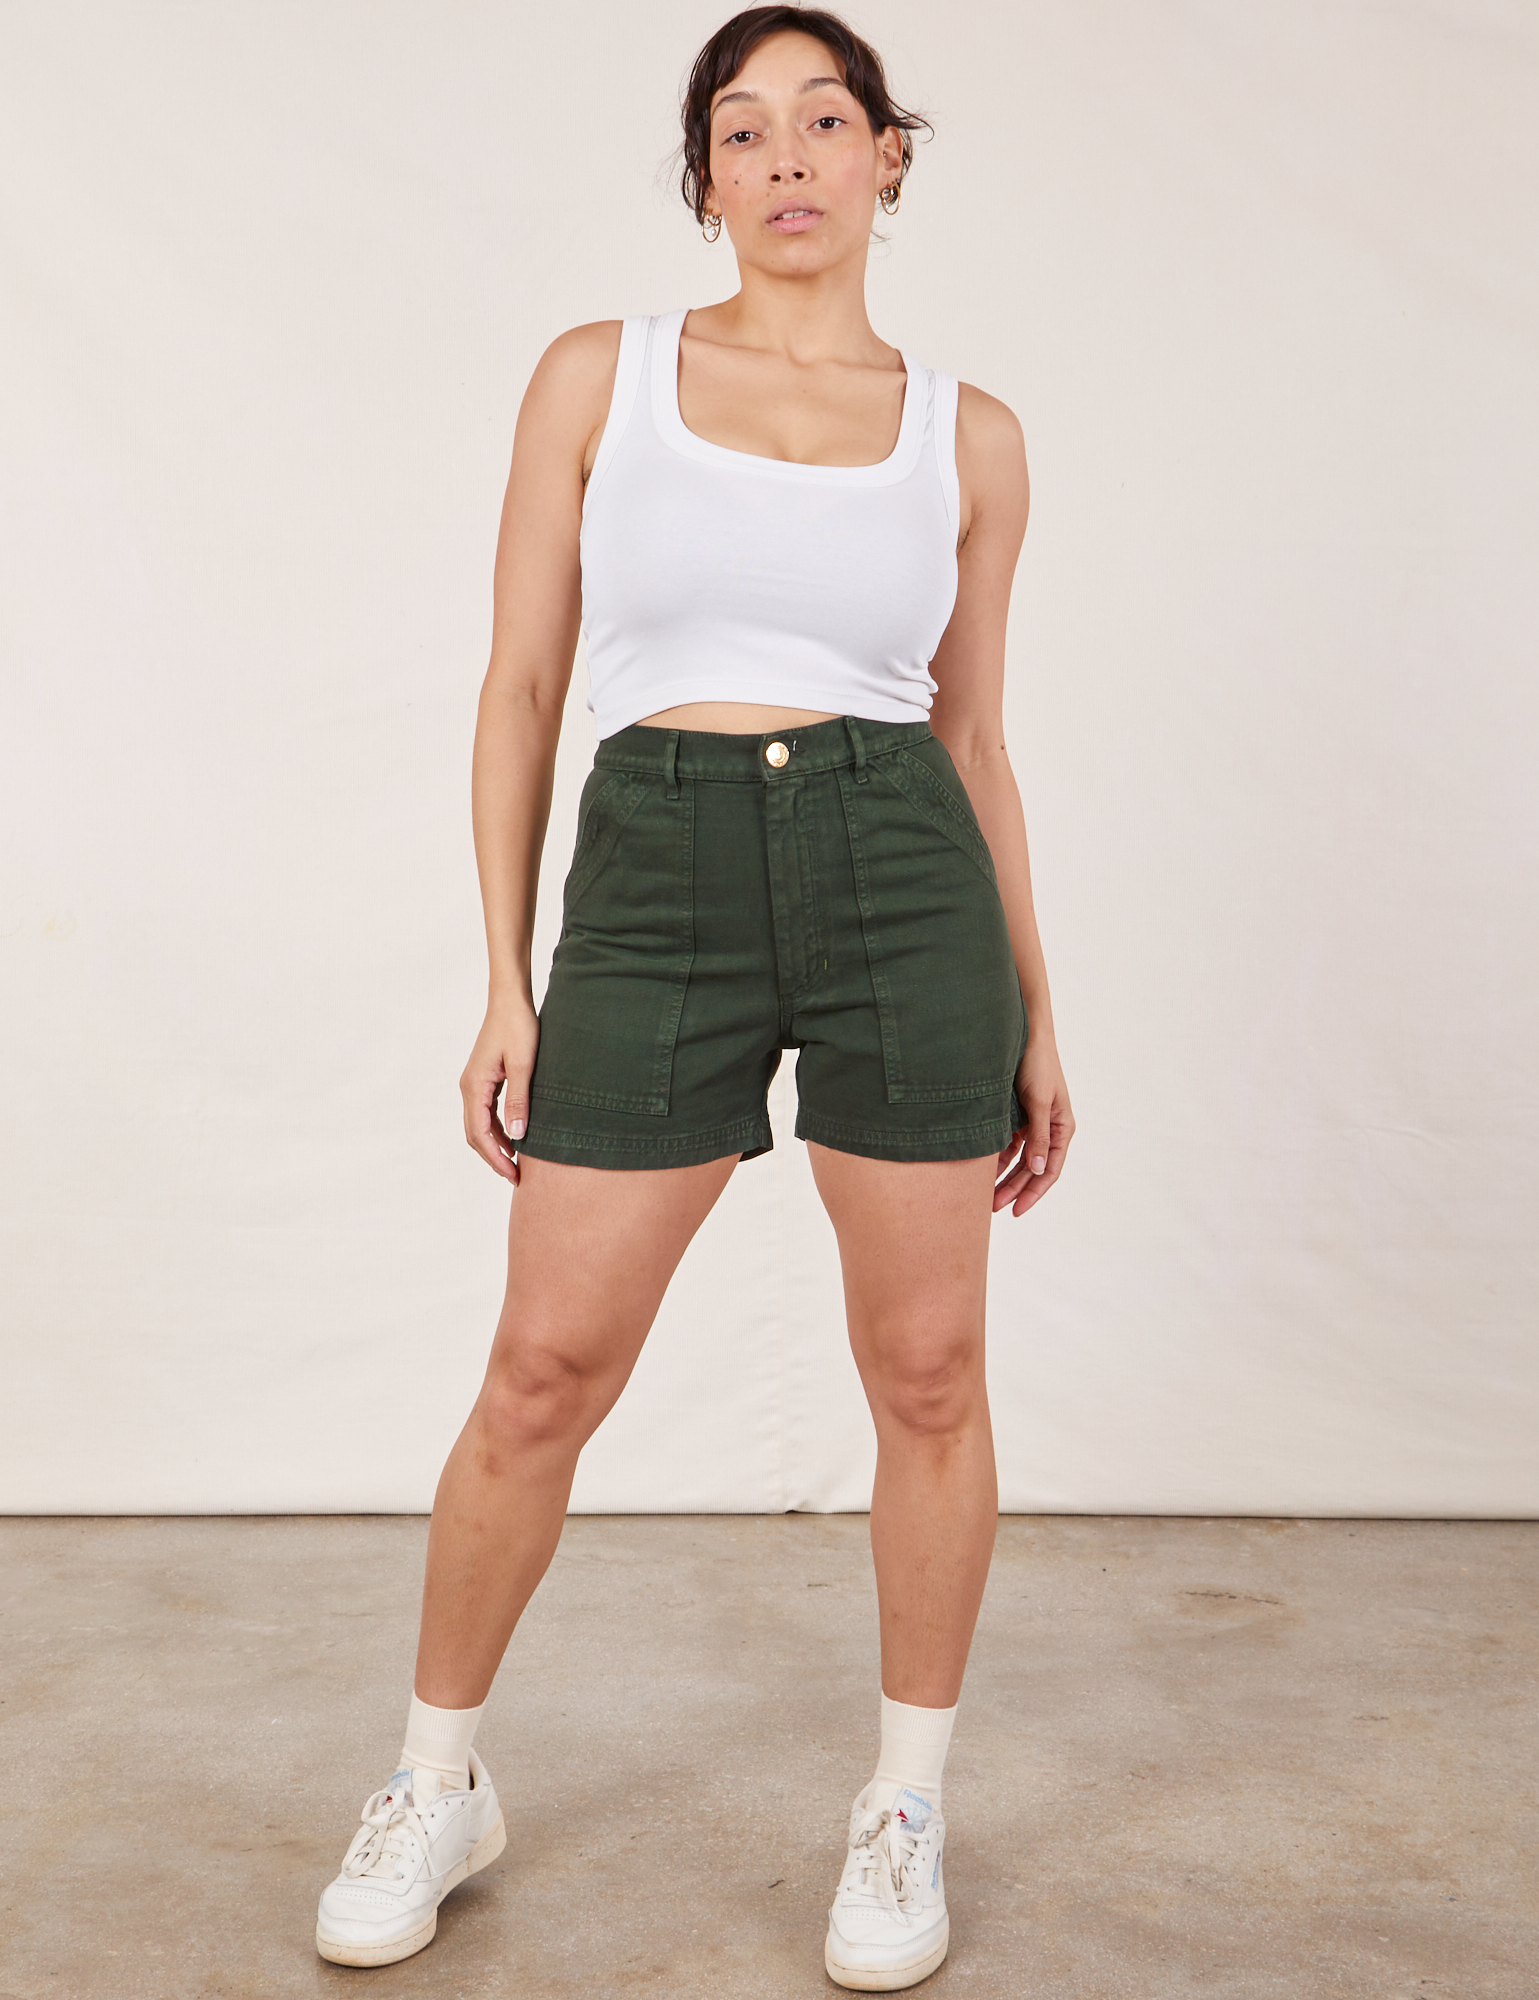 Tiara is 5’4” and wearing S Classic Work Shorts in Swamp Green paired with a Cropped Tank Top in vintage tee off-white